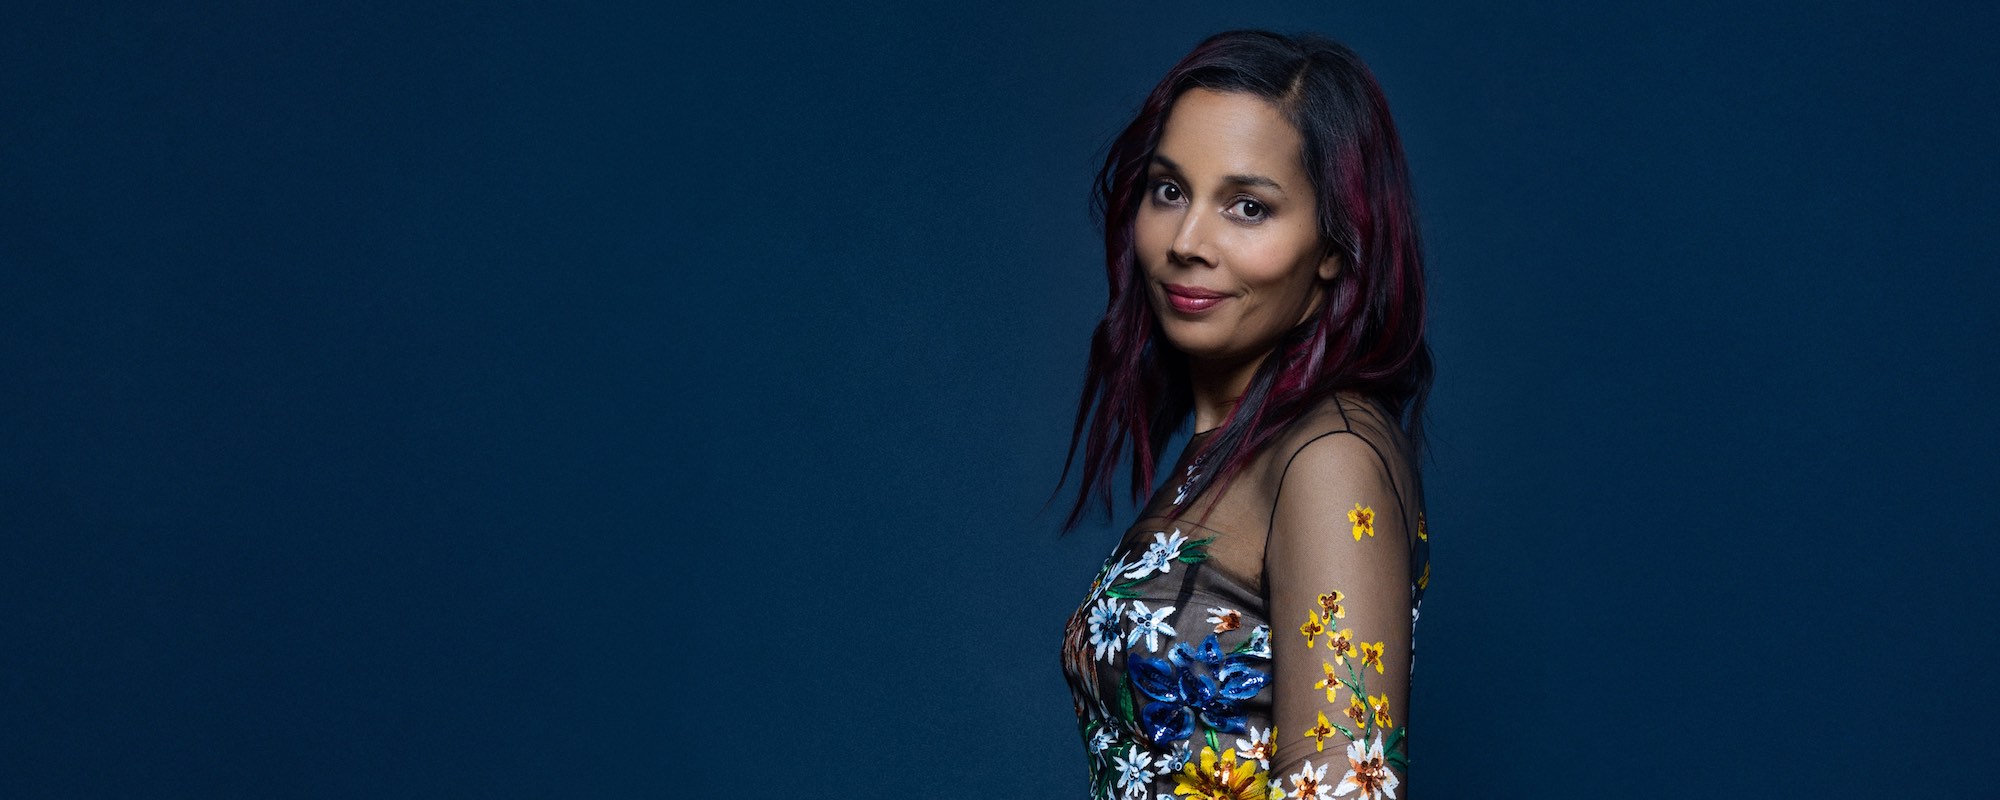 Rhiannon Giddens Recruits Jason Isbell for Moving New Duet “Yet to Be”